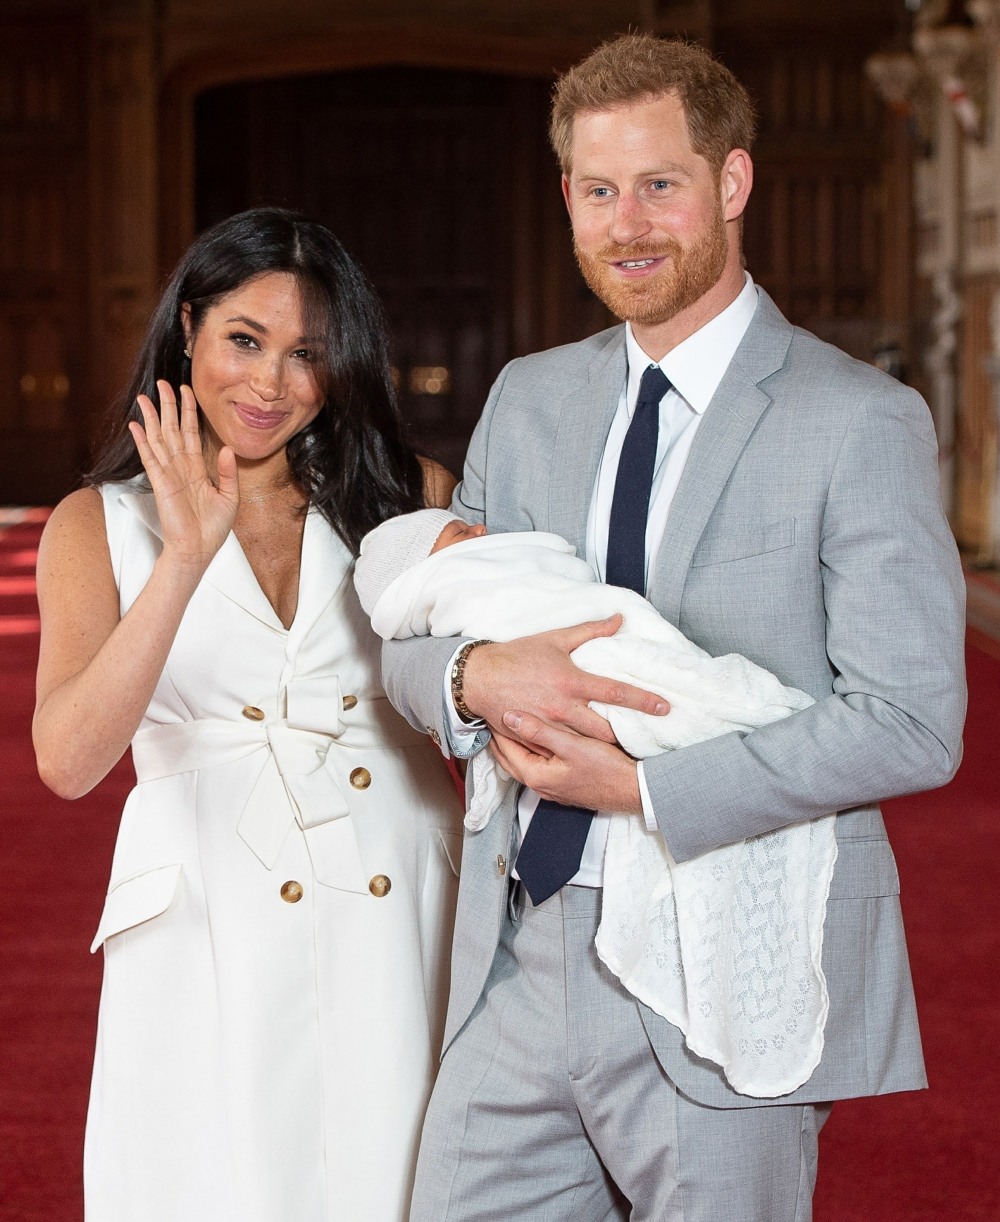 Prince Harry, Duke of Sussex and Meghan, Duchess of Sussex, pose with their newborn son